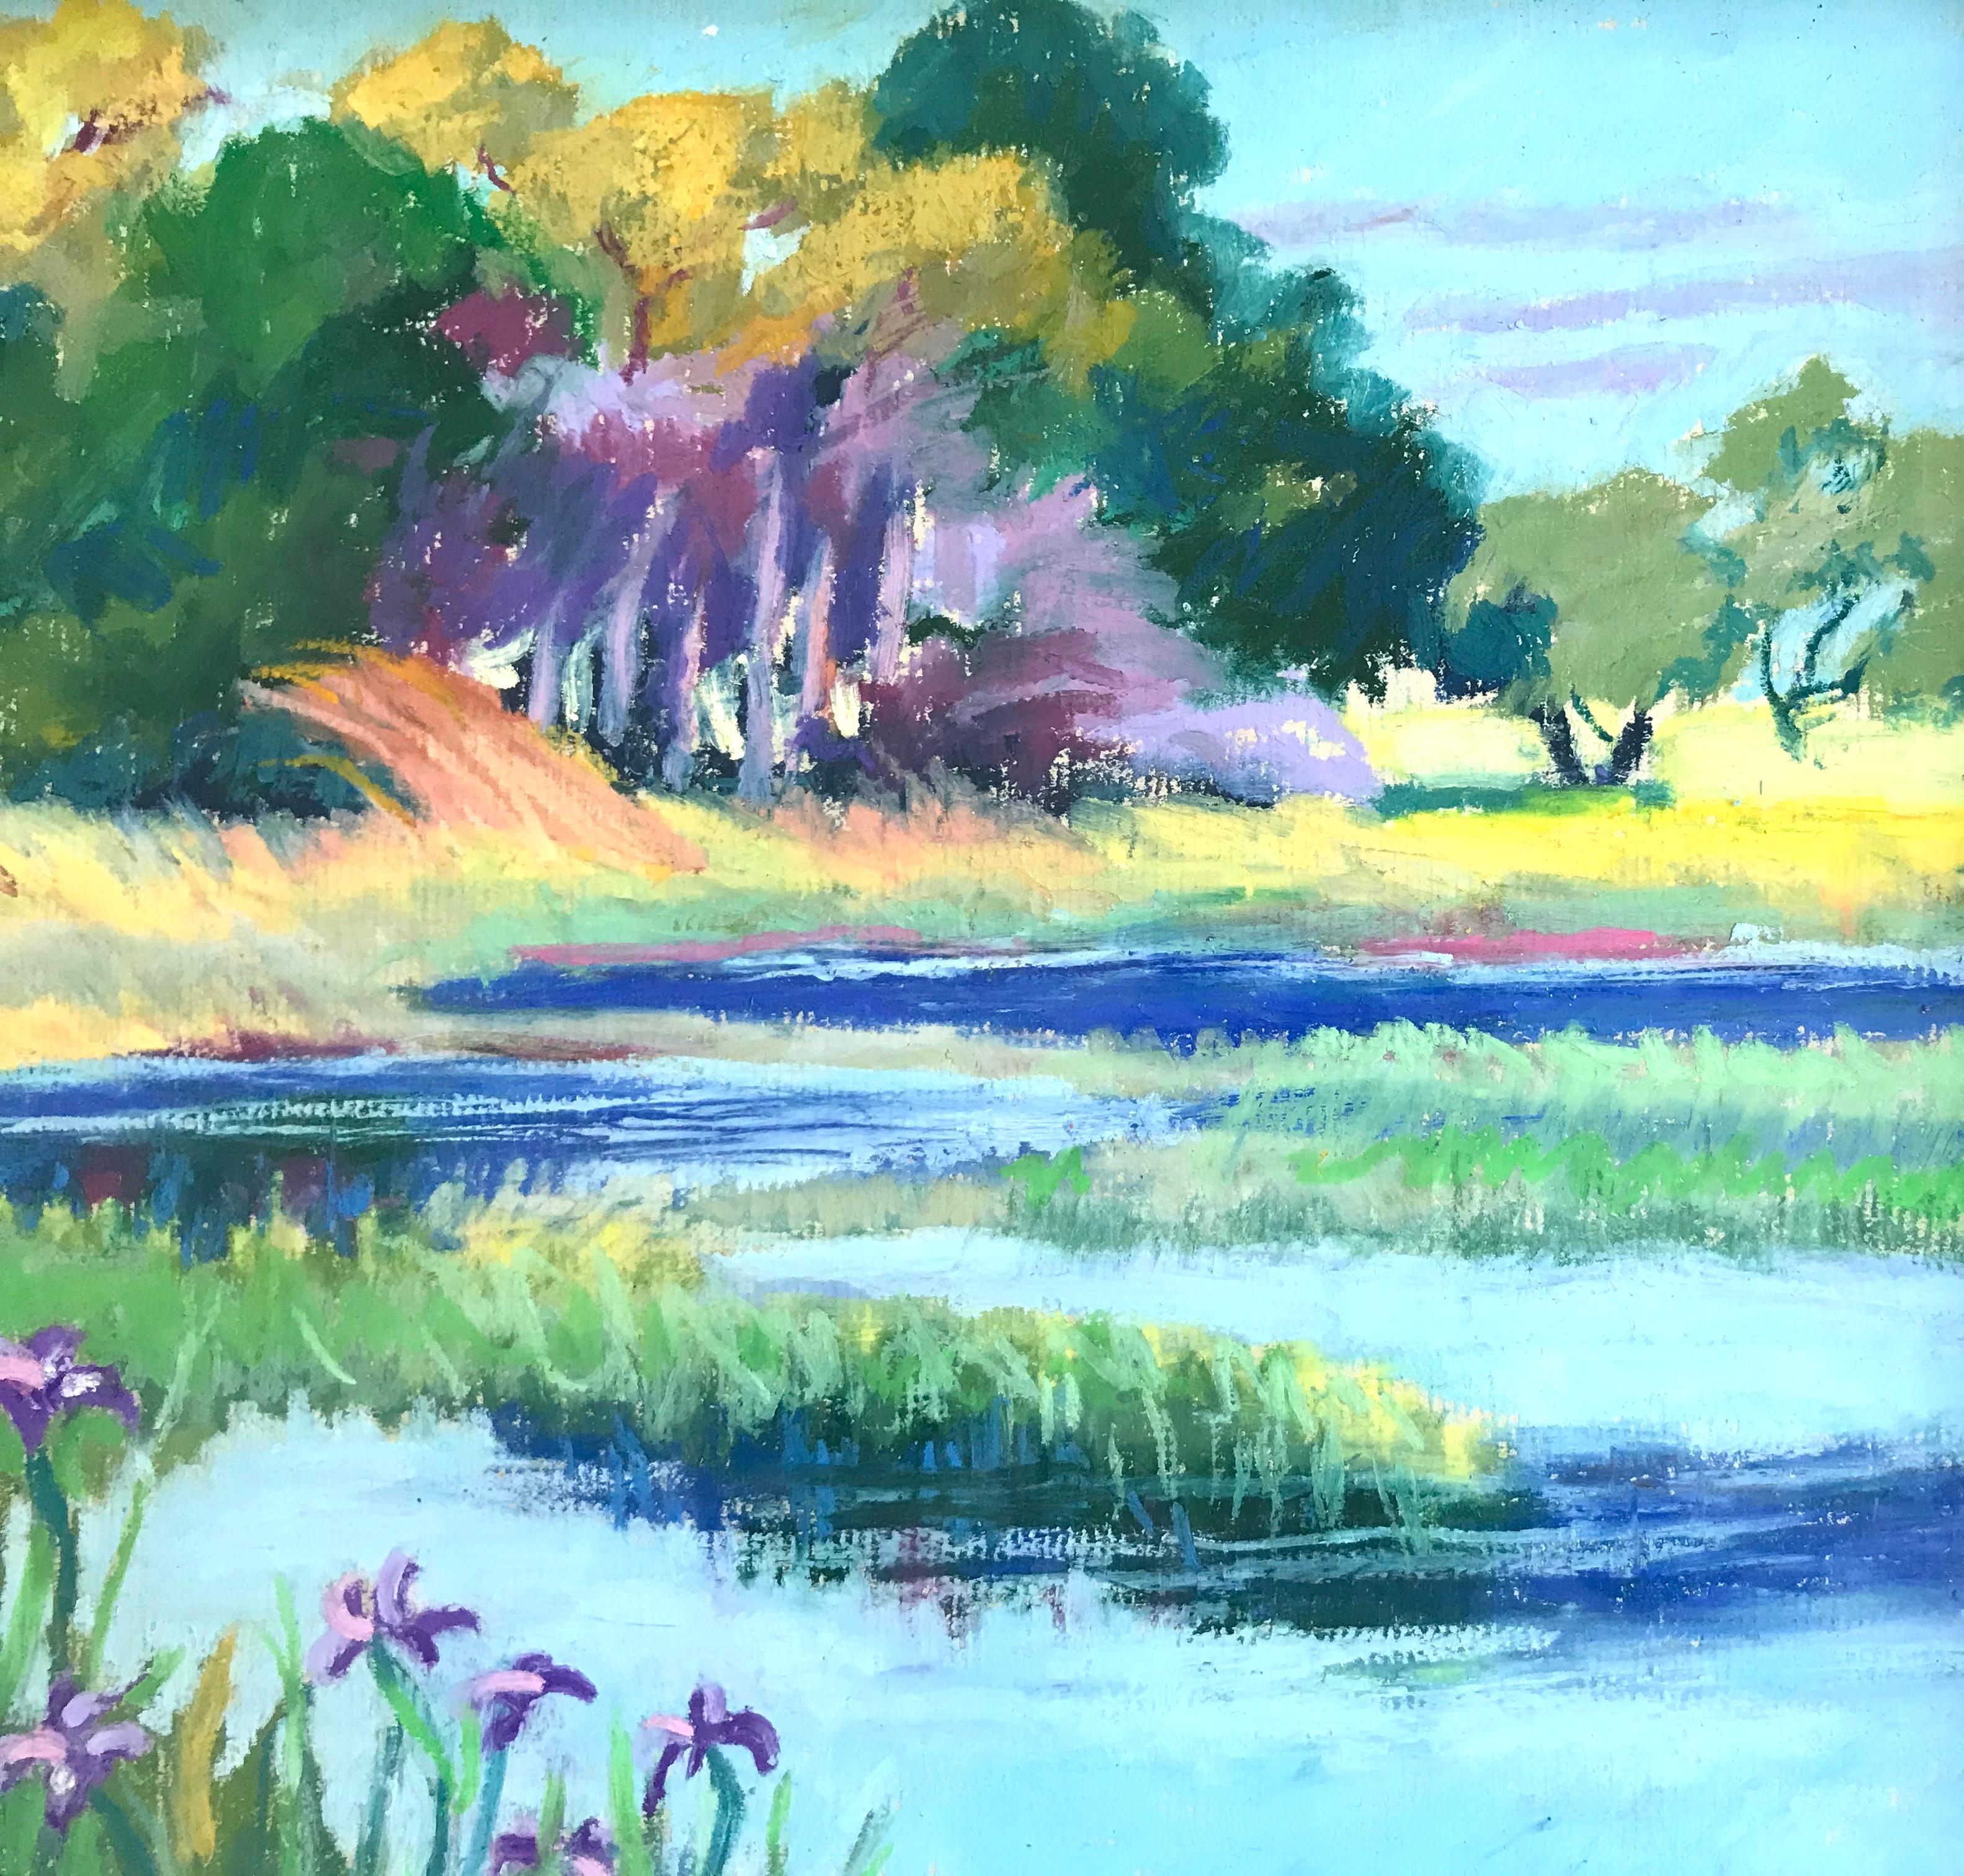 Very colorful and vibrant well executed mixed media composition of oil pastel and gouache on artist board by the American artist, Julee Docking.  Signed lower right. Titled verso. Location is Myakka State Park in Sarasota, Florida.  Circa 1975.  In